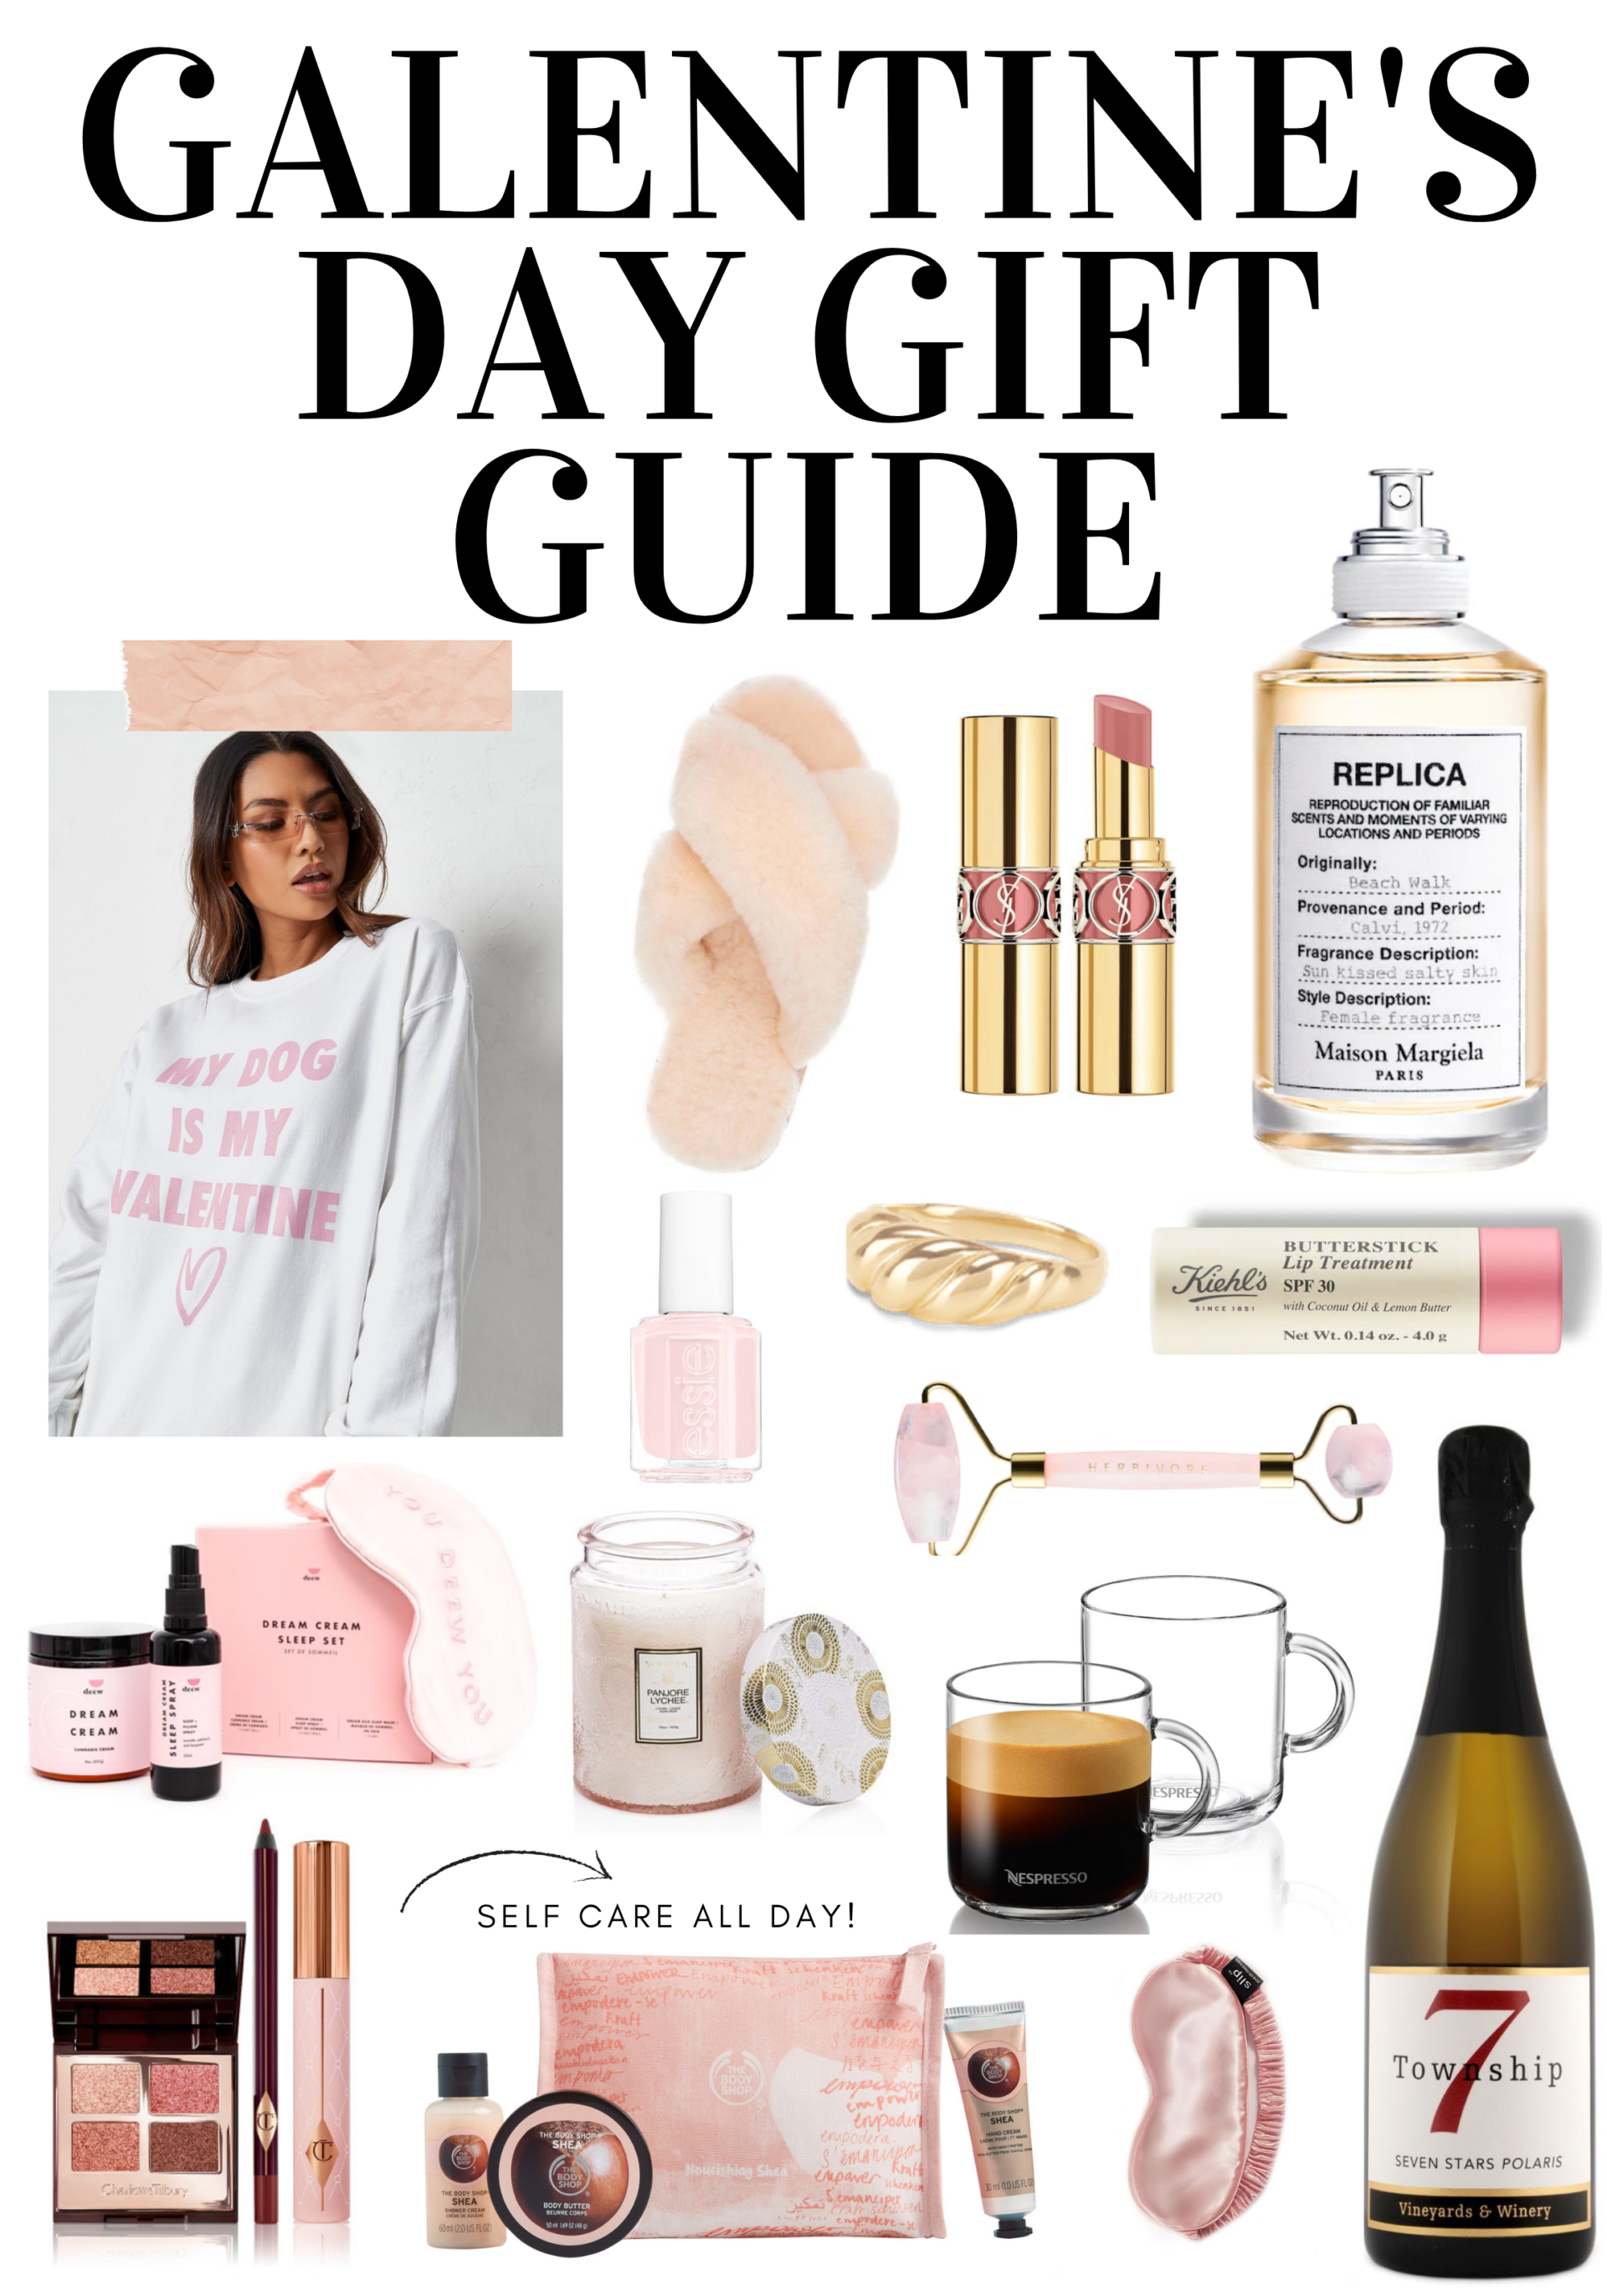 Gift Guide for Galentine's Day